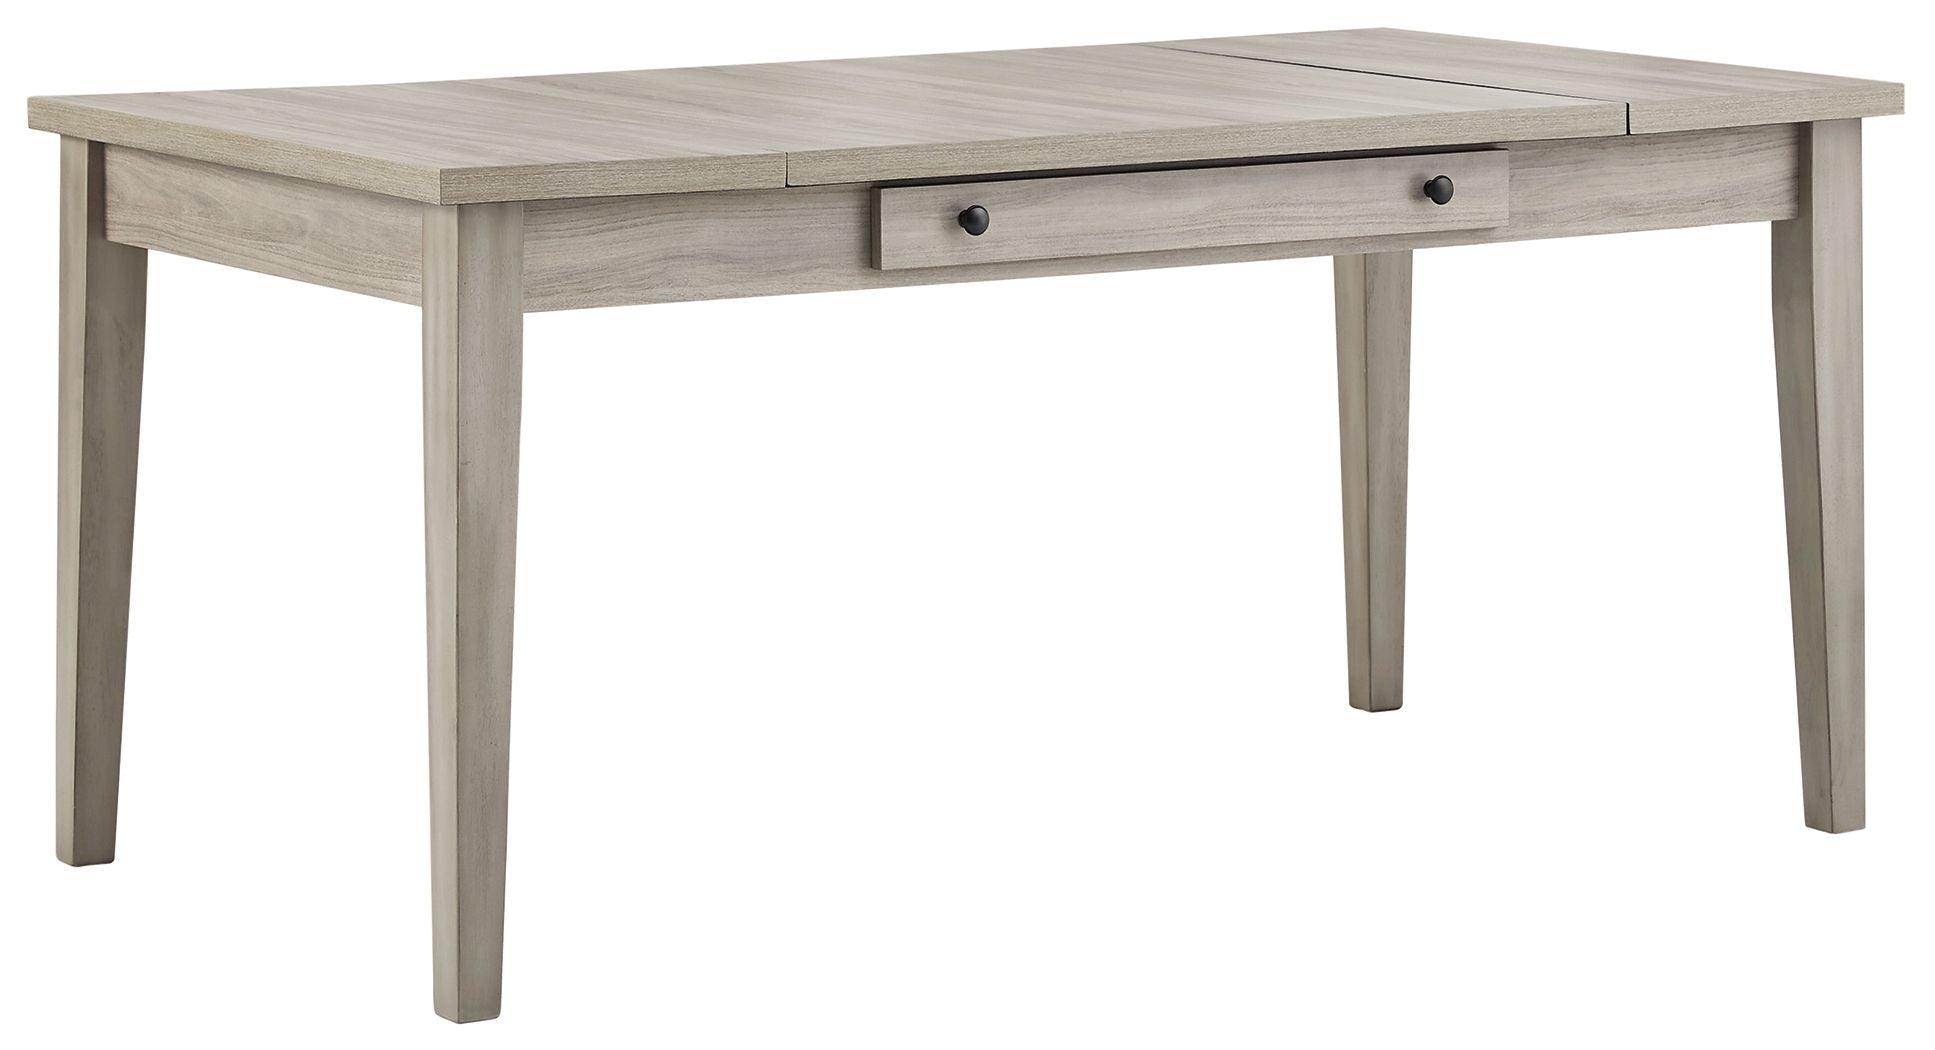 Signature Design by Ashley® - Parellen - Gray - Rectangular Dining Room Table With Storage - 5th Avenue Furniture